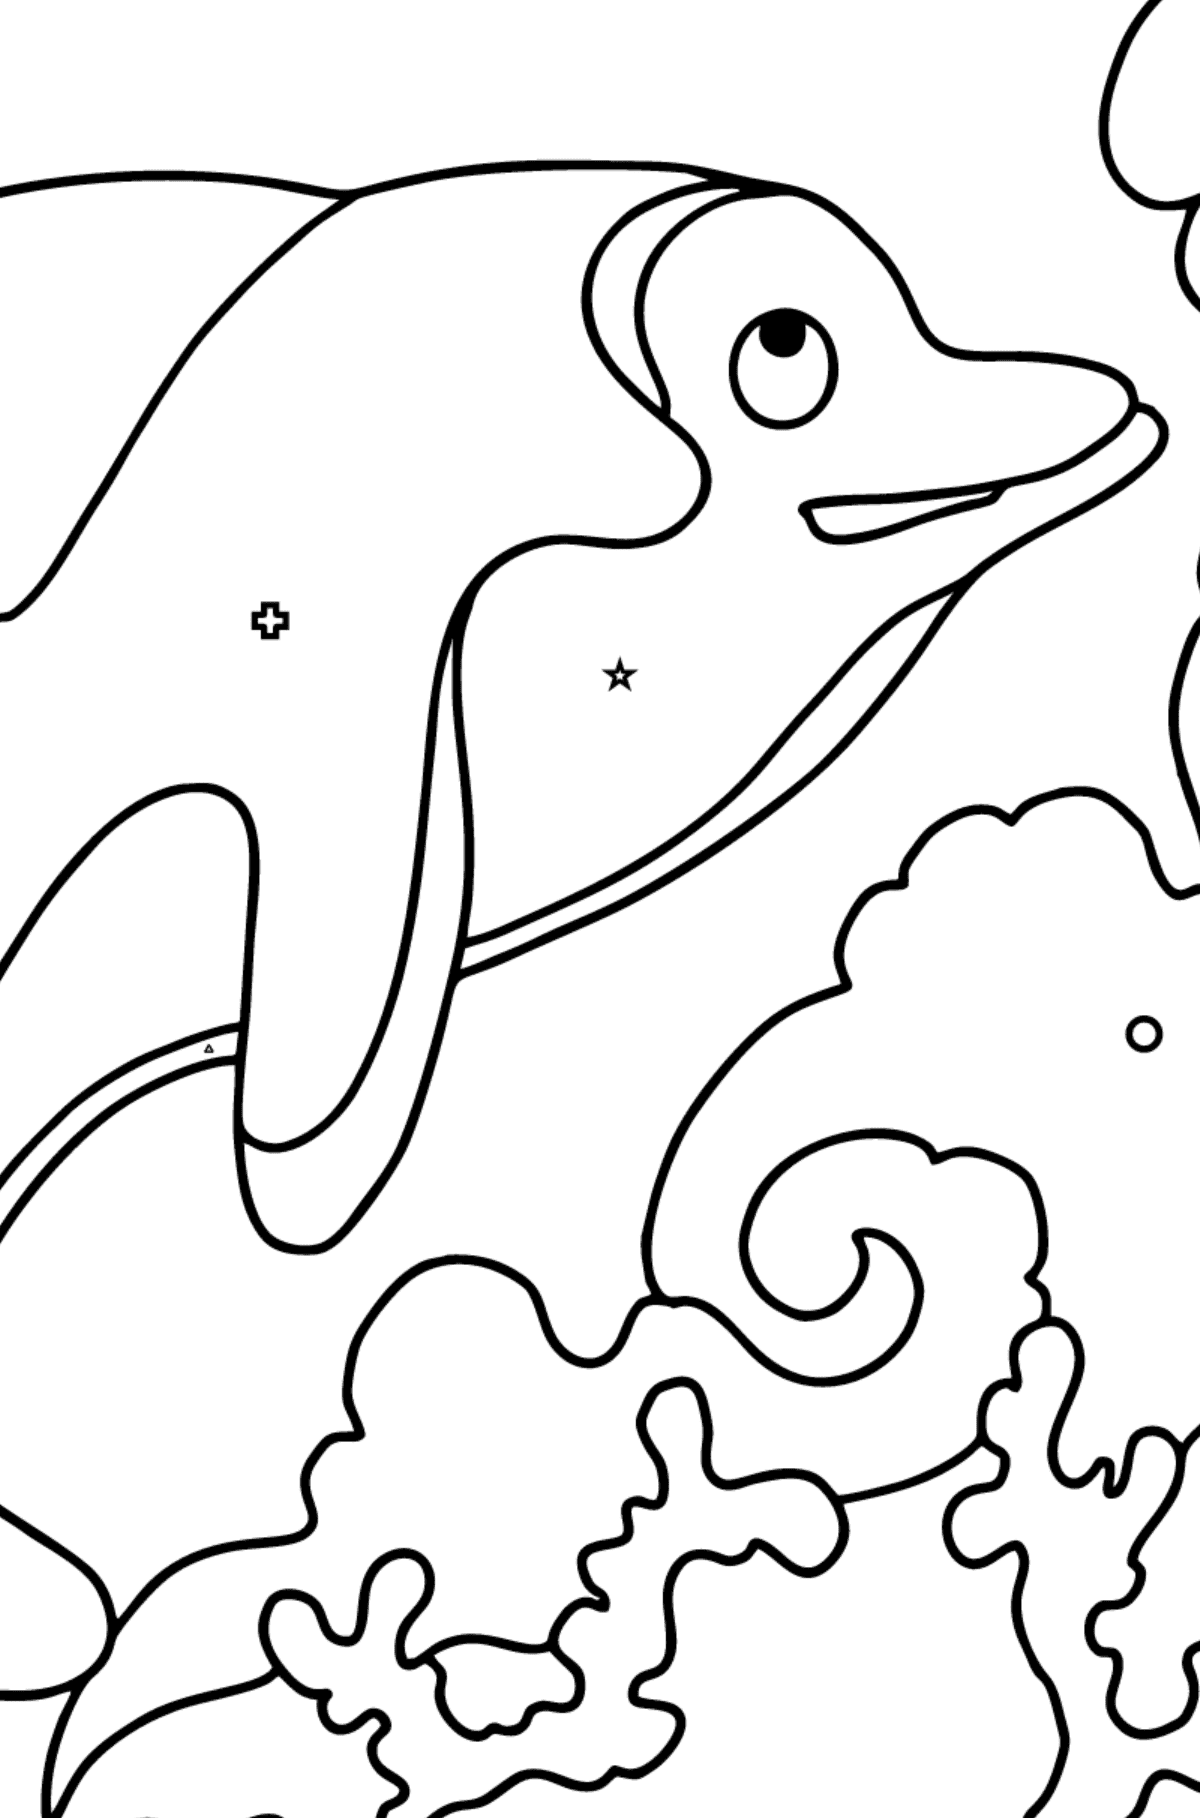 Coloring Page - A Dolphin, a Smart and Friendly Animal - Coloring by Geometric Shapes for Children